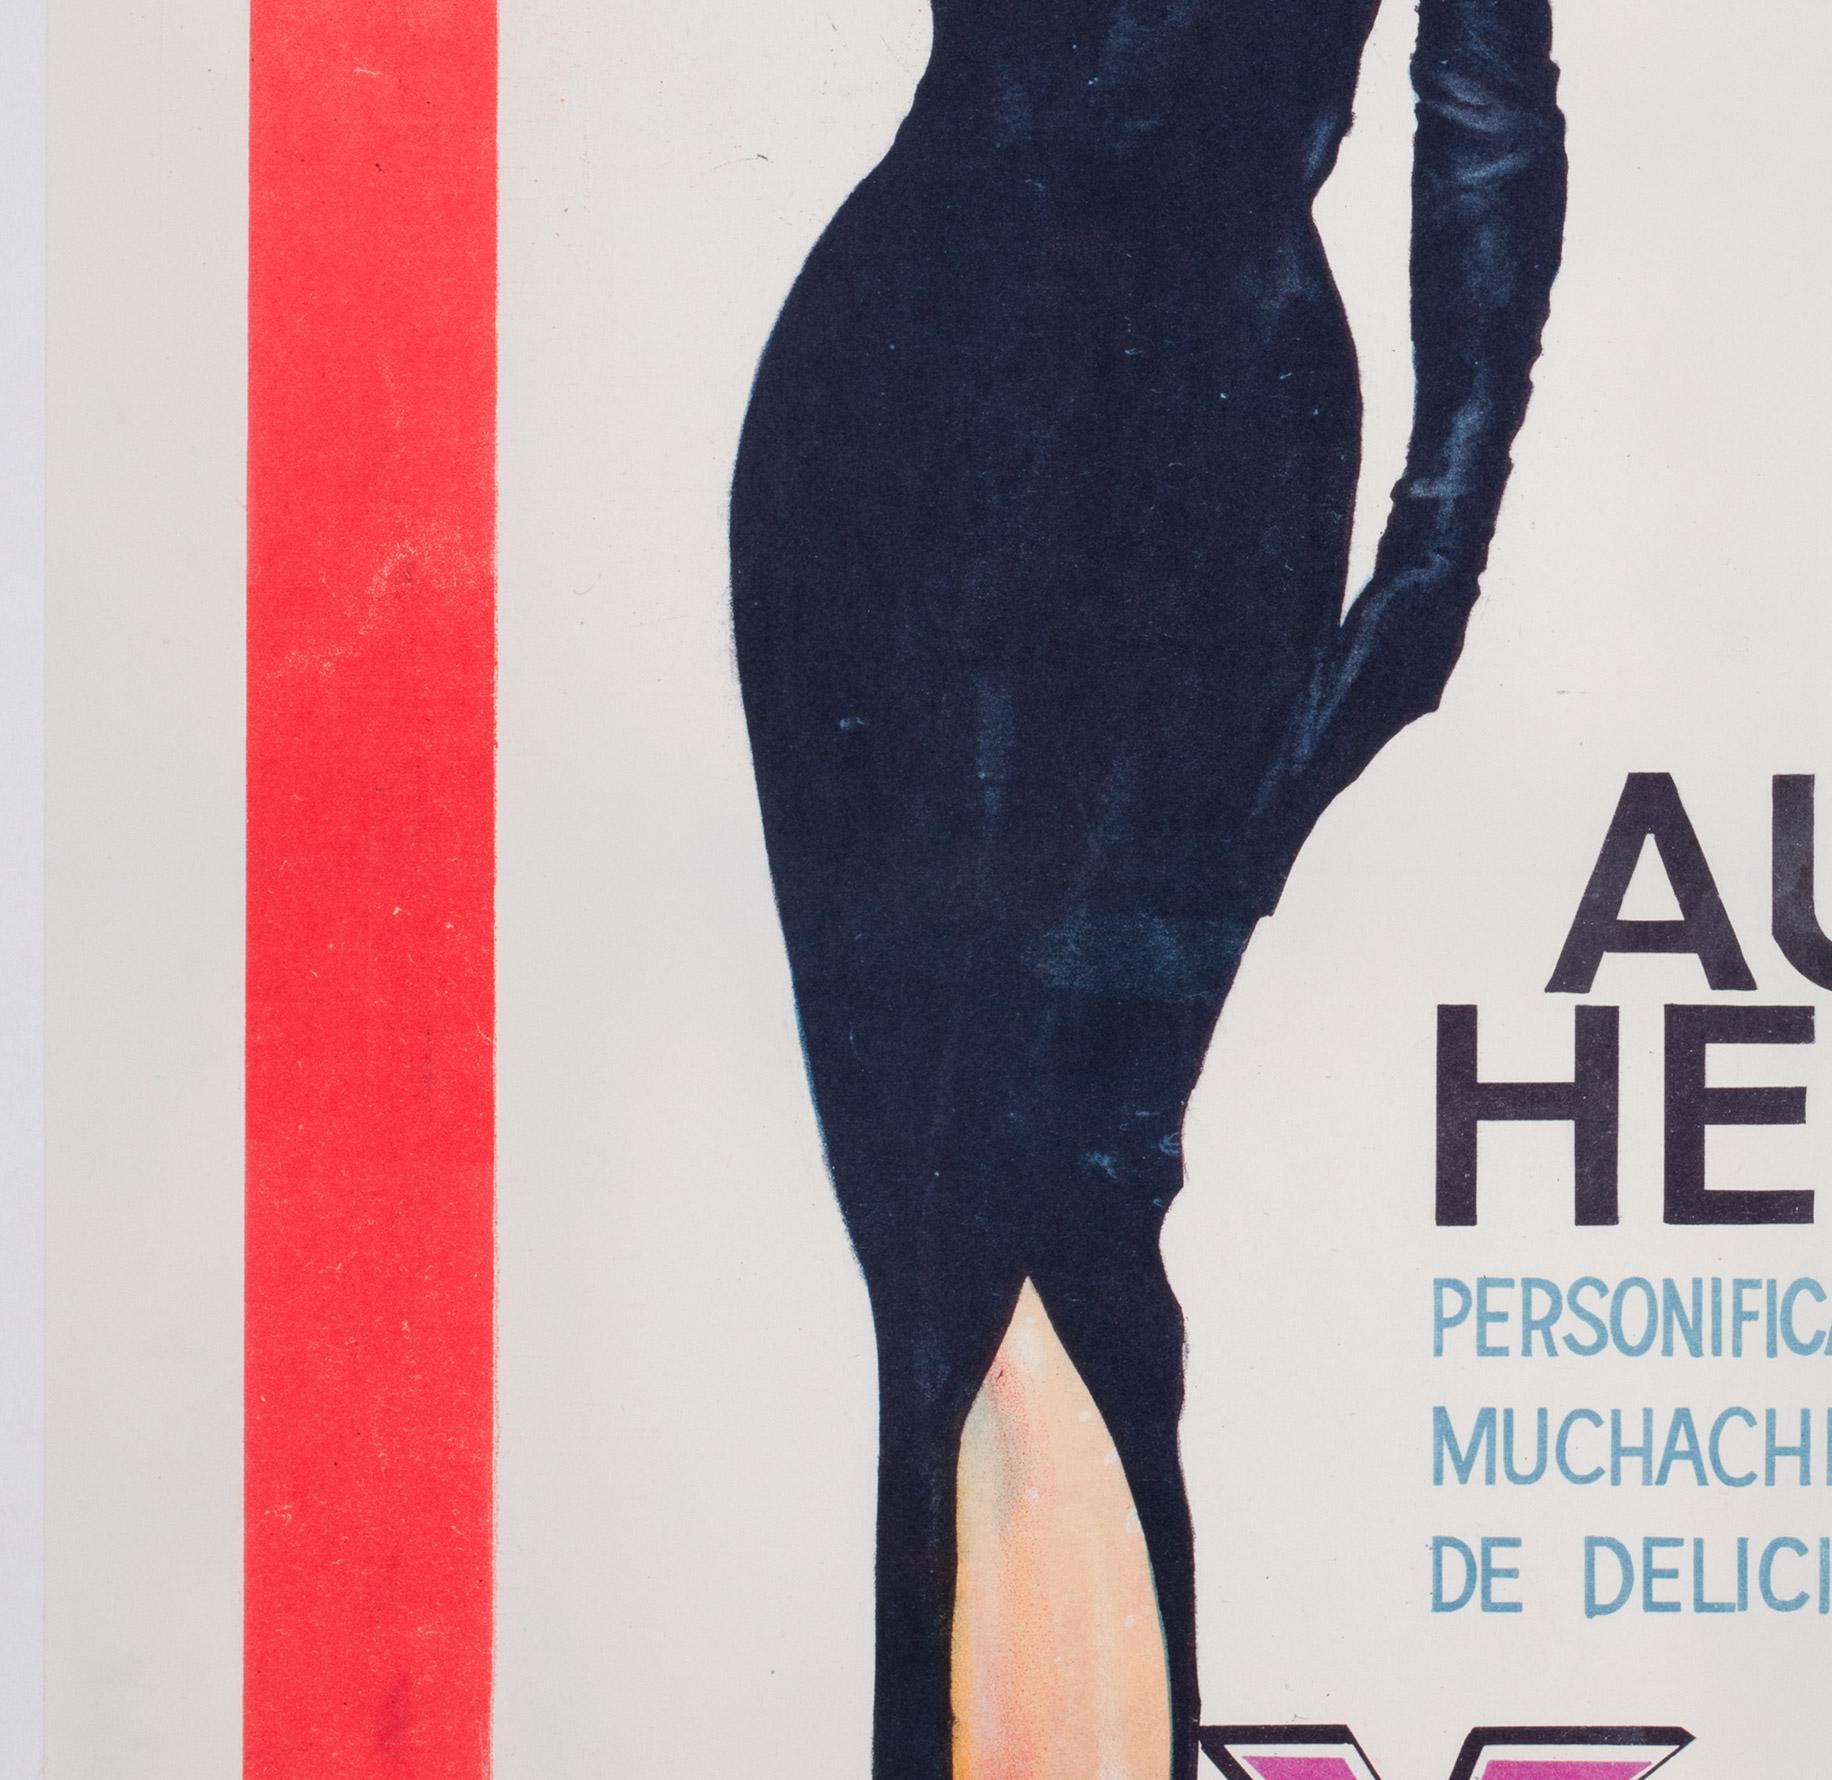 Argentine Breakfast at Tiffany’s 1961 Argentinian Film Movie Poster Audrey Hepburn For Sale